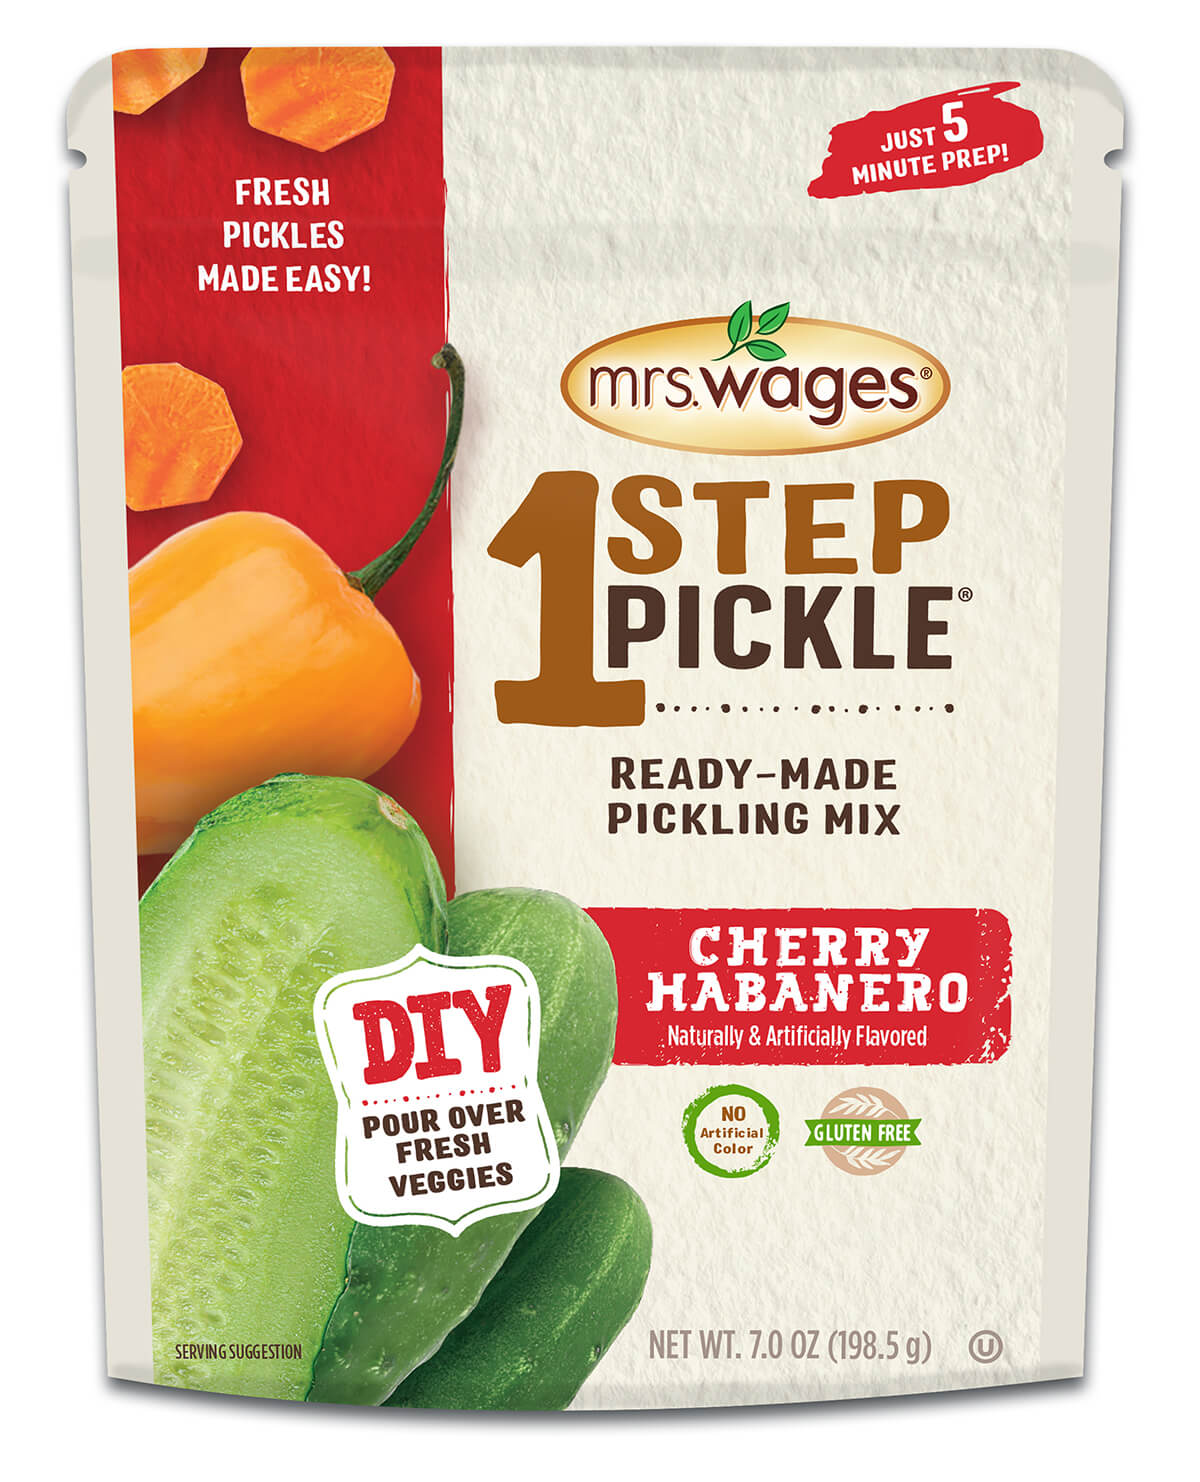 Mrs. Wages® 1 Step Pickle® Cherry Habanero Ready-Made Pickling Mix – Naturally & Artificially Flavored